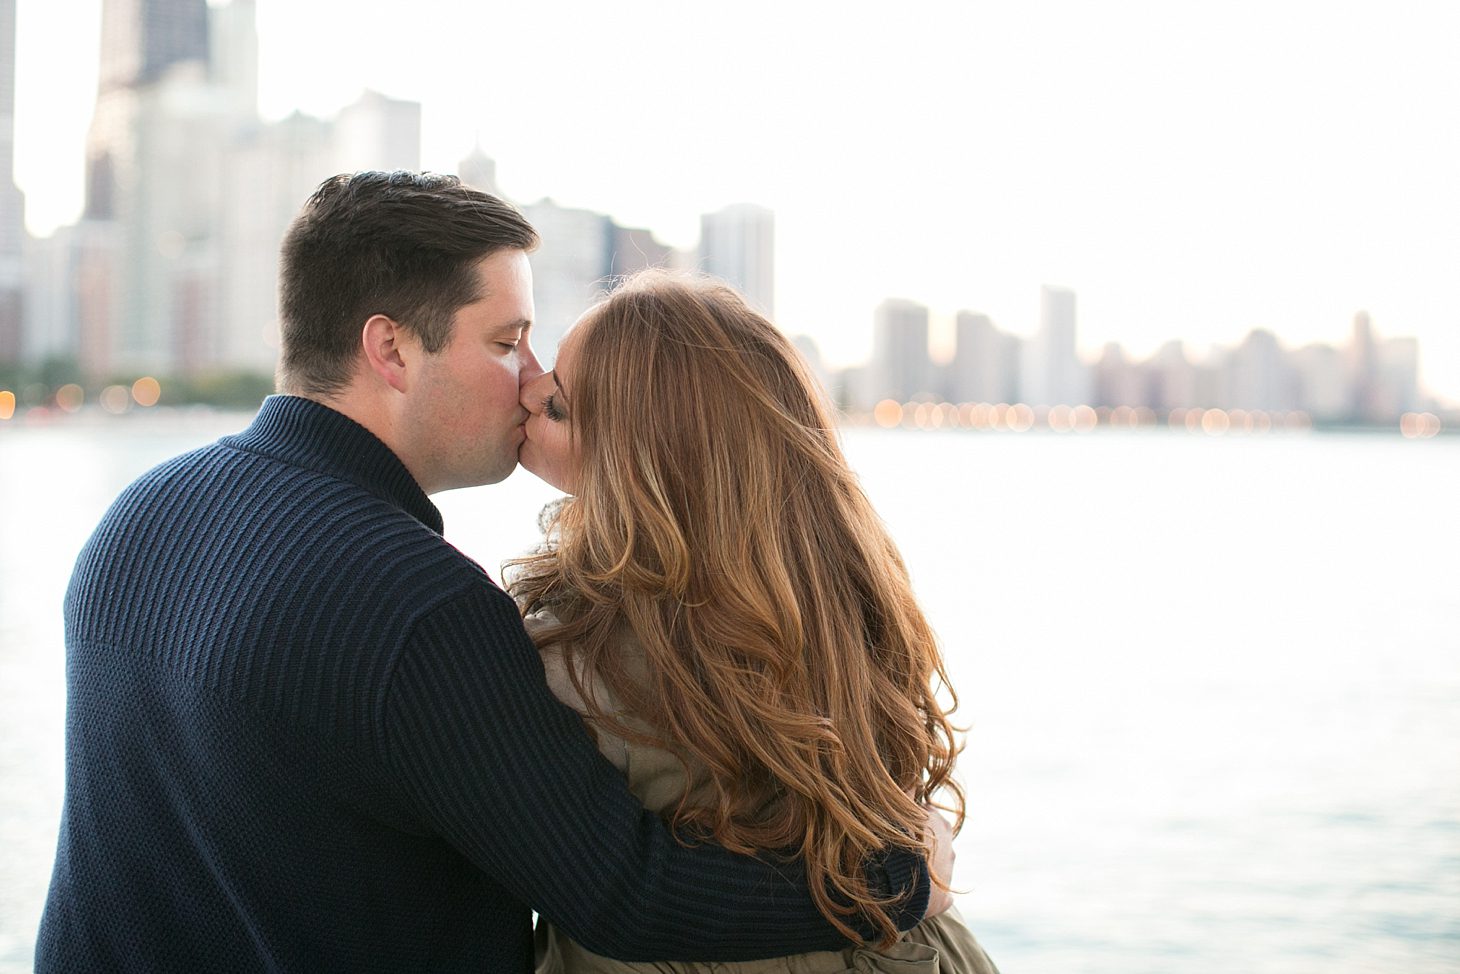 olive-park-engagement-photos-by-christy-tyler-photography_0027